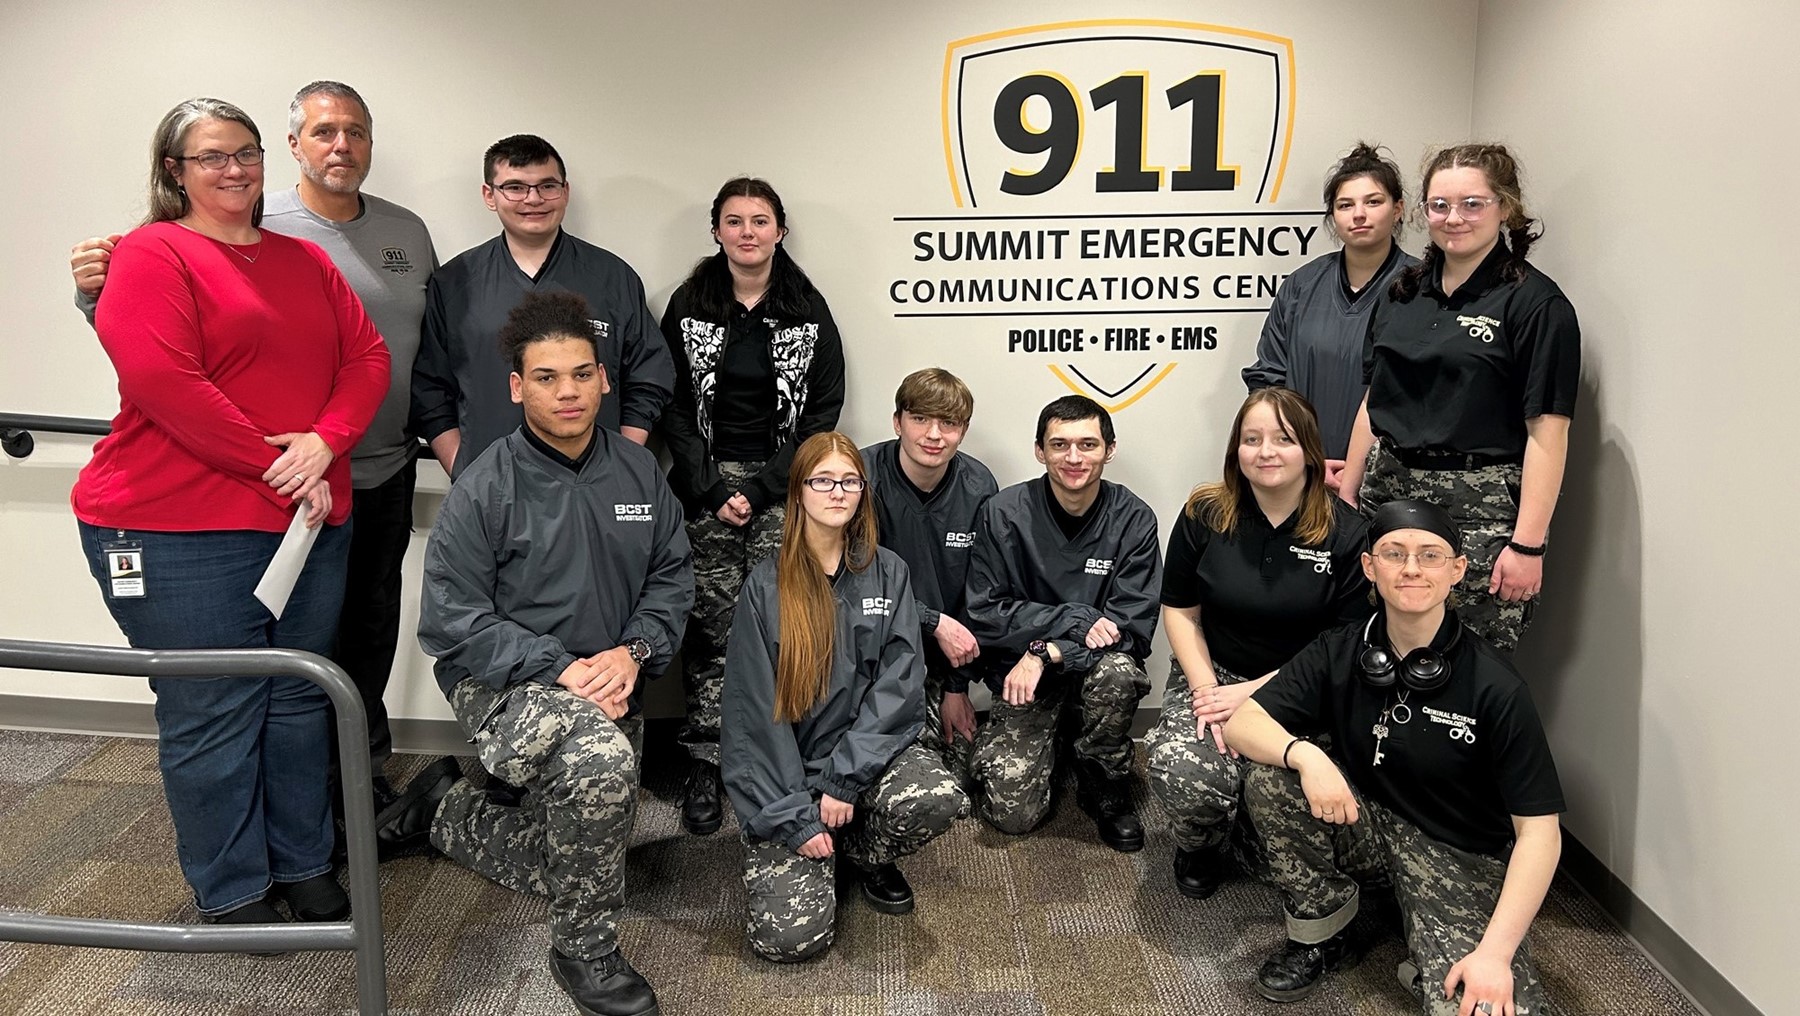 Criminal Science Technology seniors recently visited and toured the new Summit Emergency Communications Center